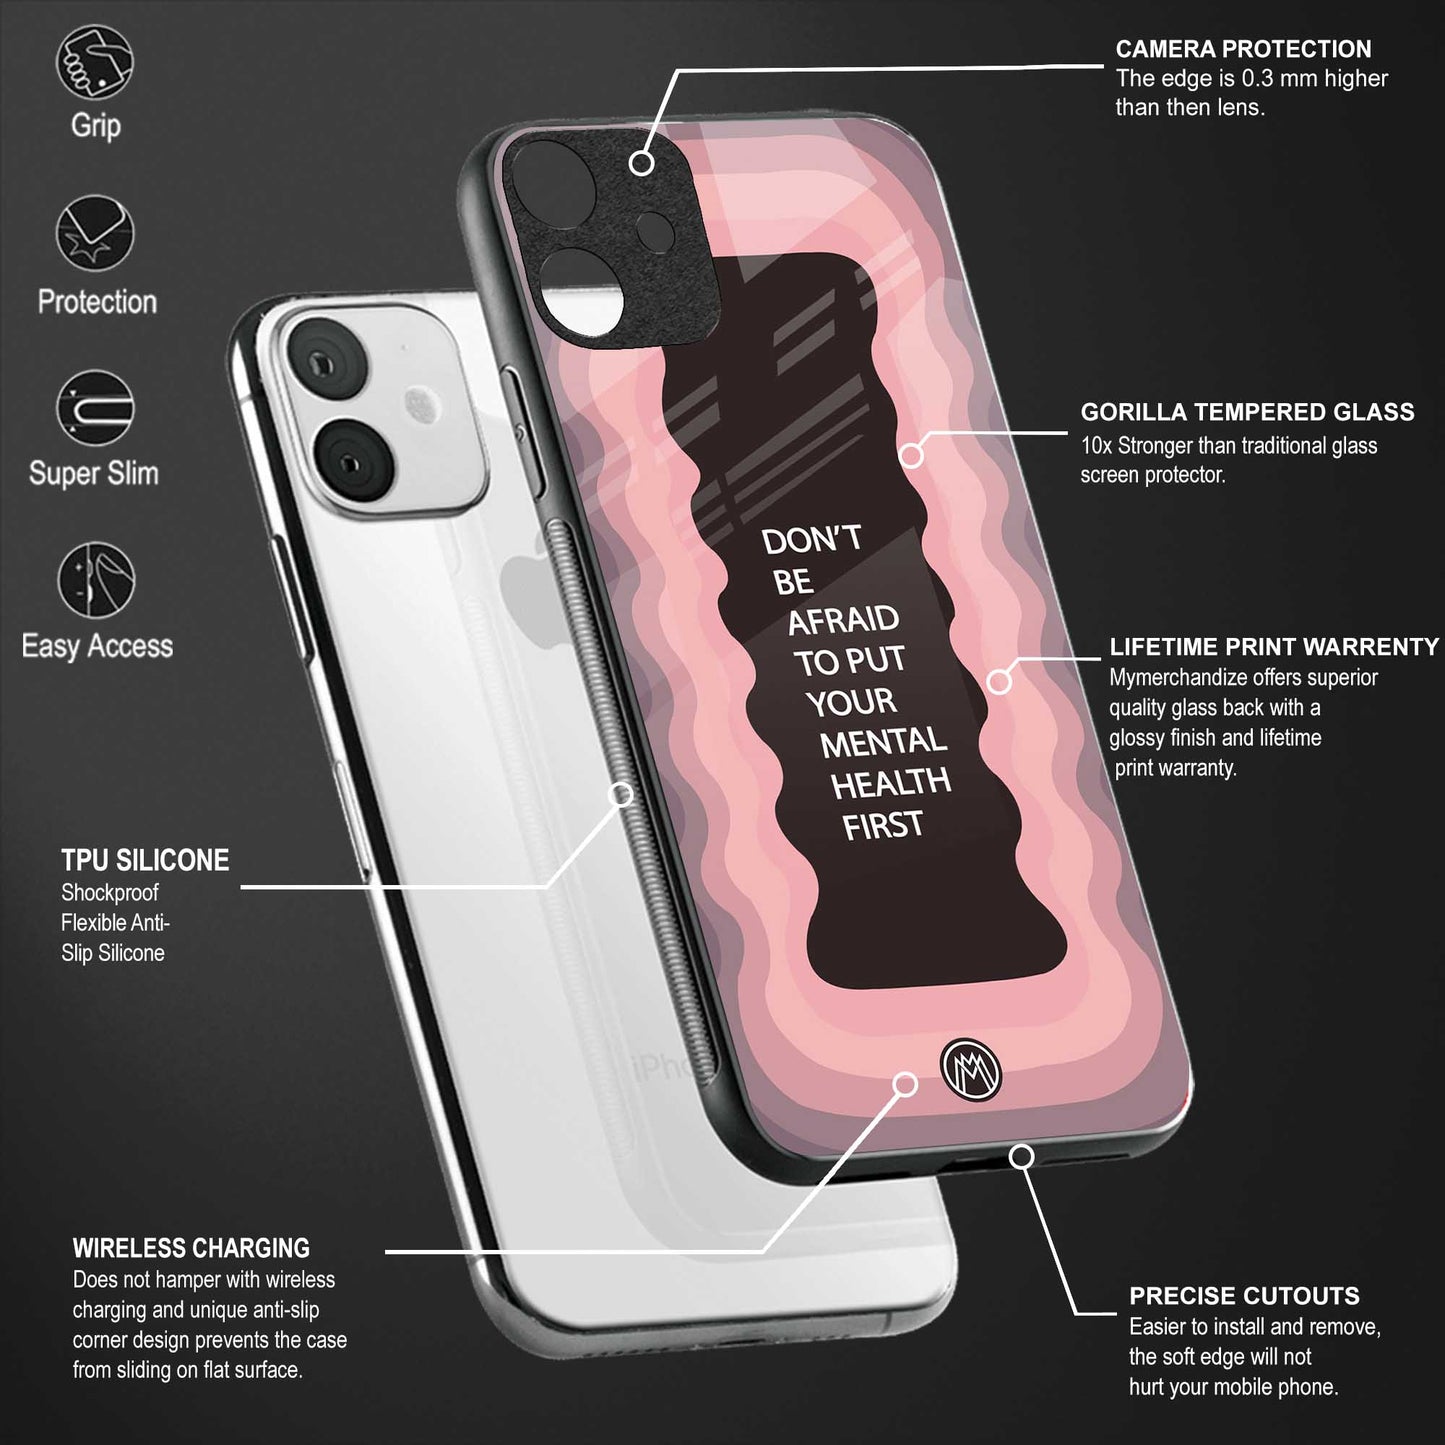 mental health first glass case for iphone 11 pro max